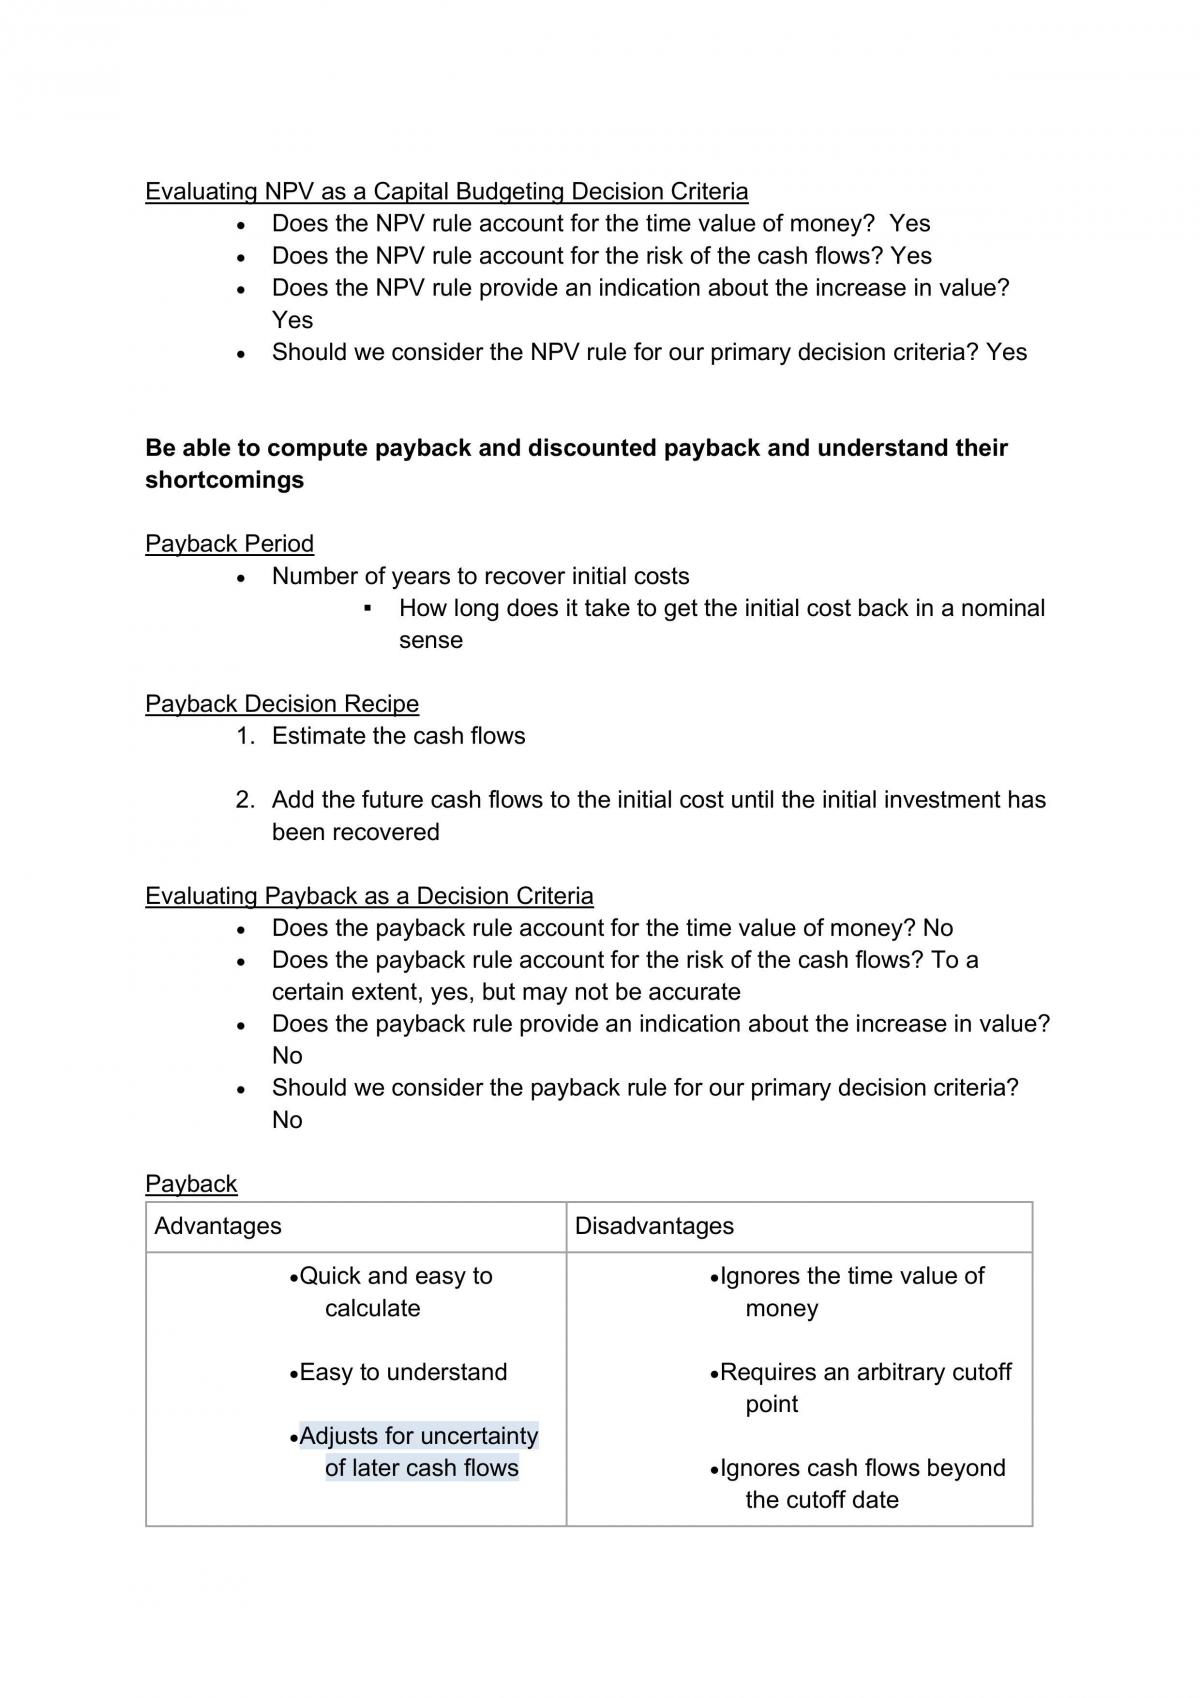 FIN2704 Summary Notes - Page 42